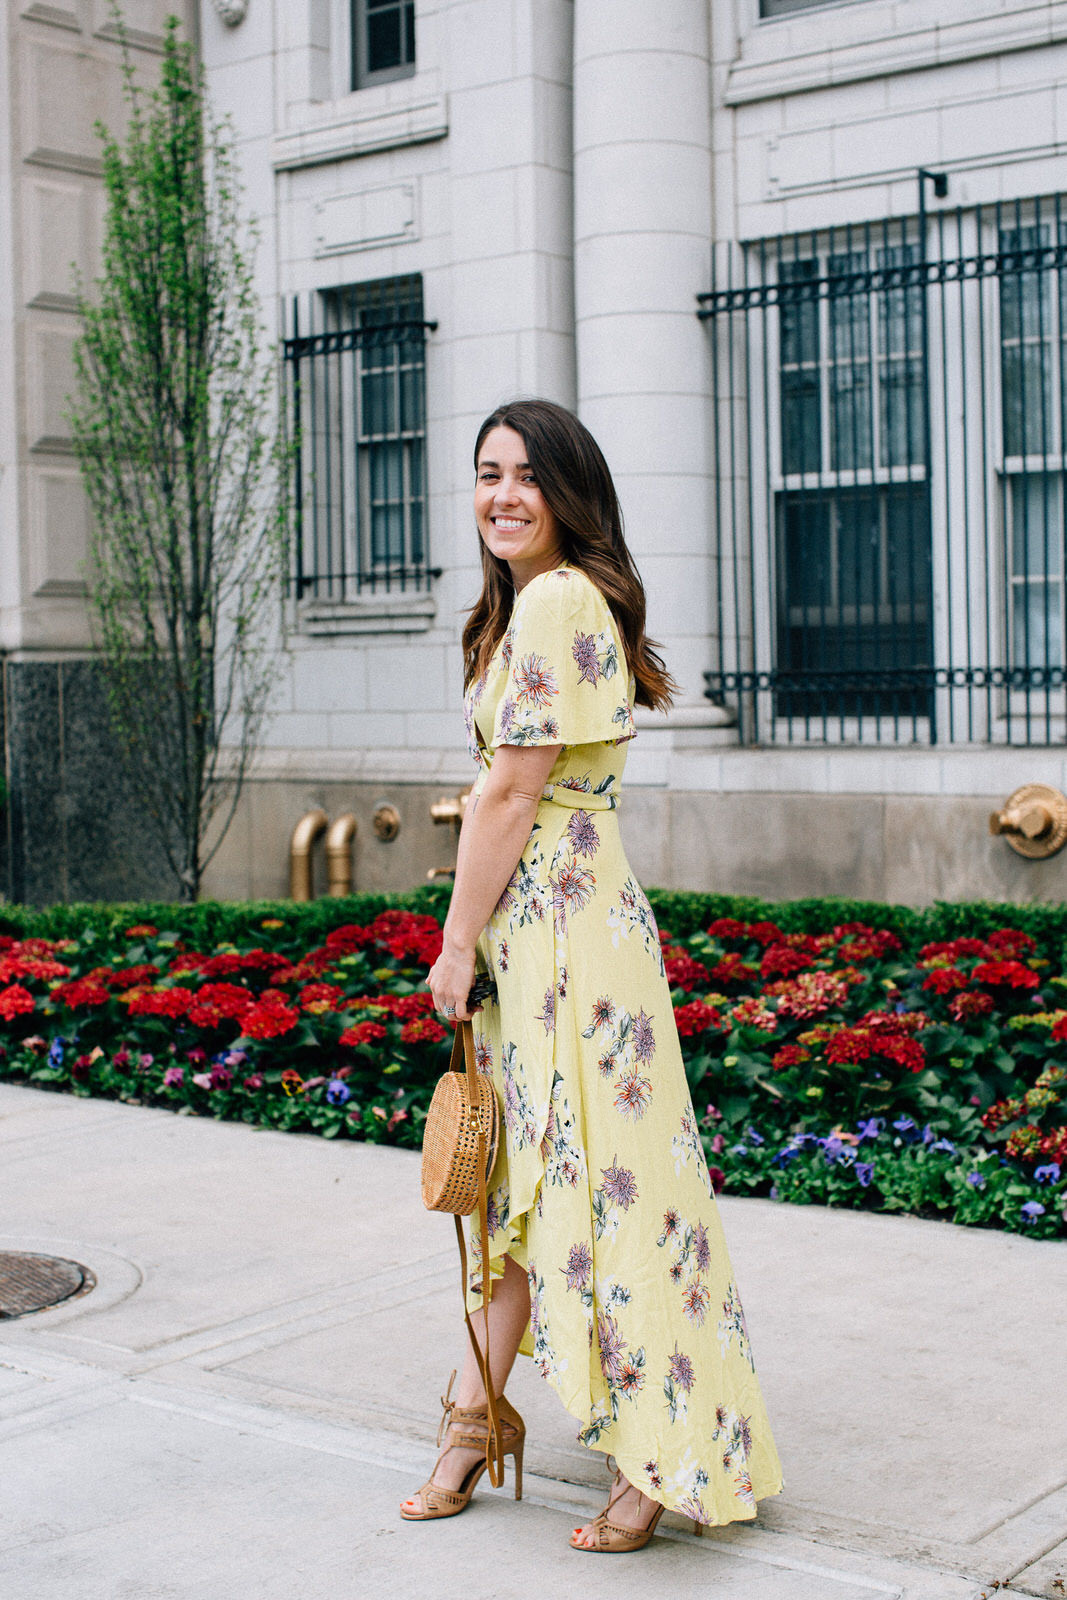 Dresses To Wear To A Wedding As A Guest
 10 Wedding Guest Dresses to Wear This Season Under $150